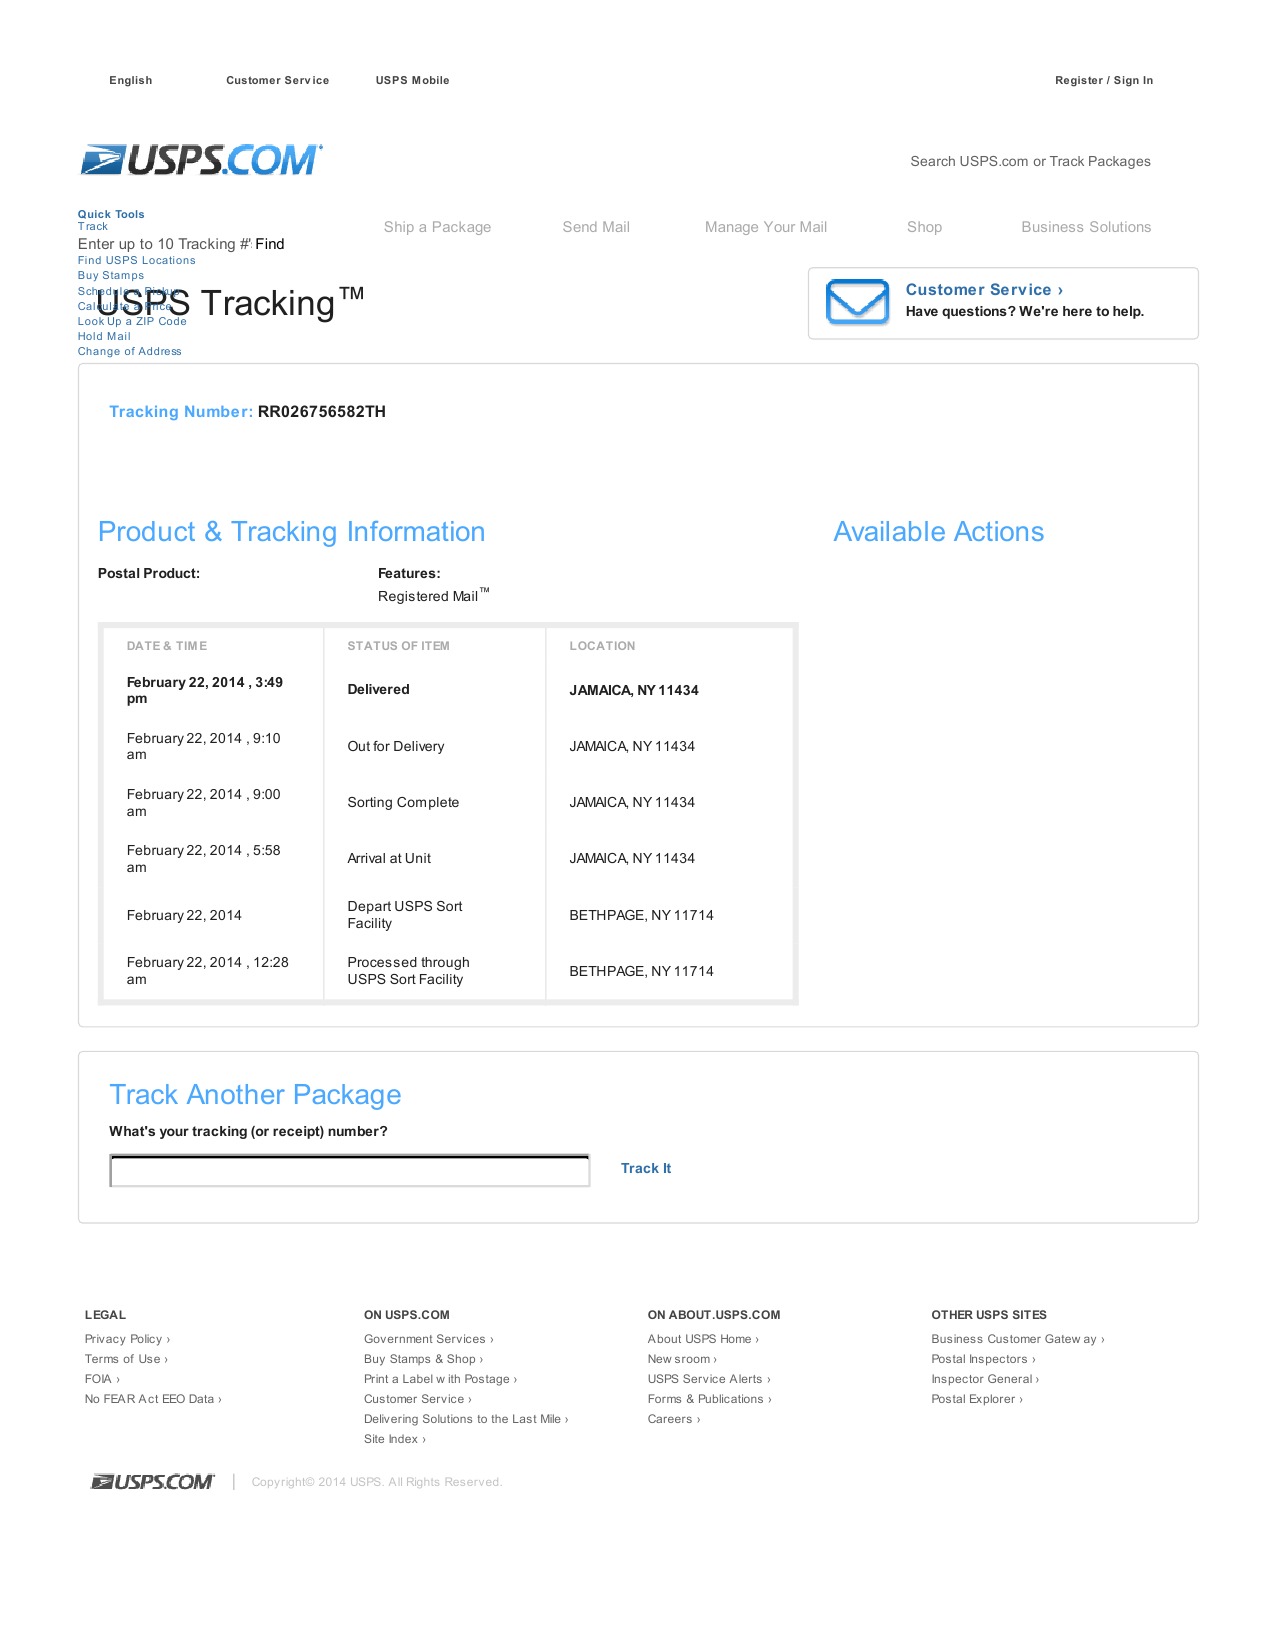 Fake tracking number they provided to PayPal fraudulently